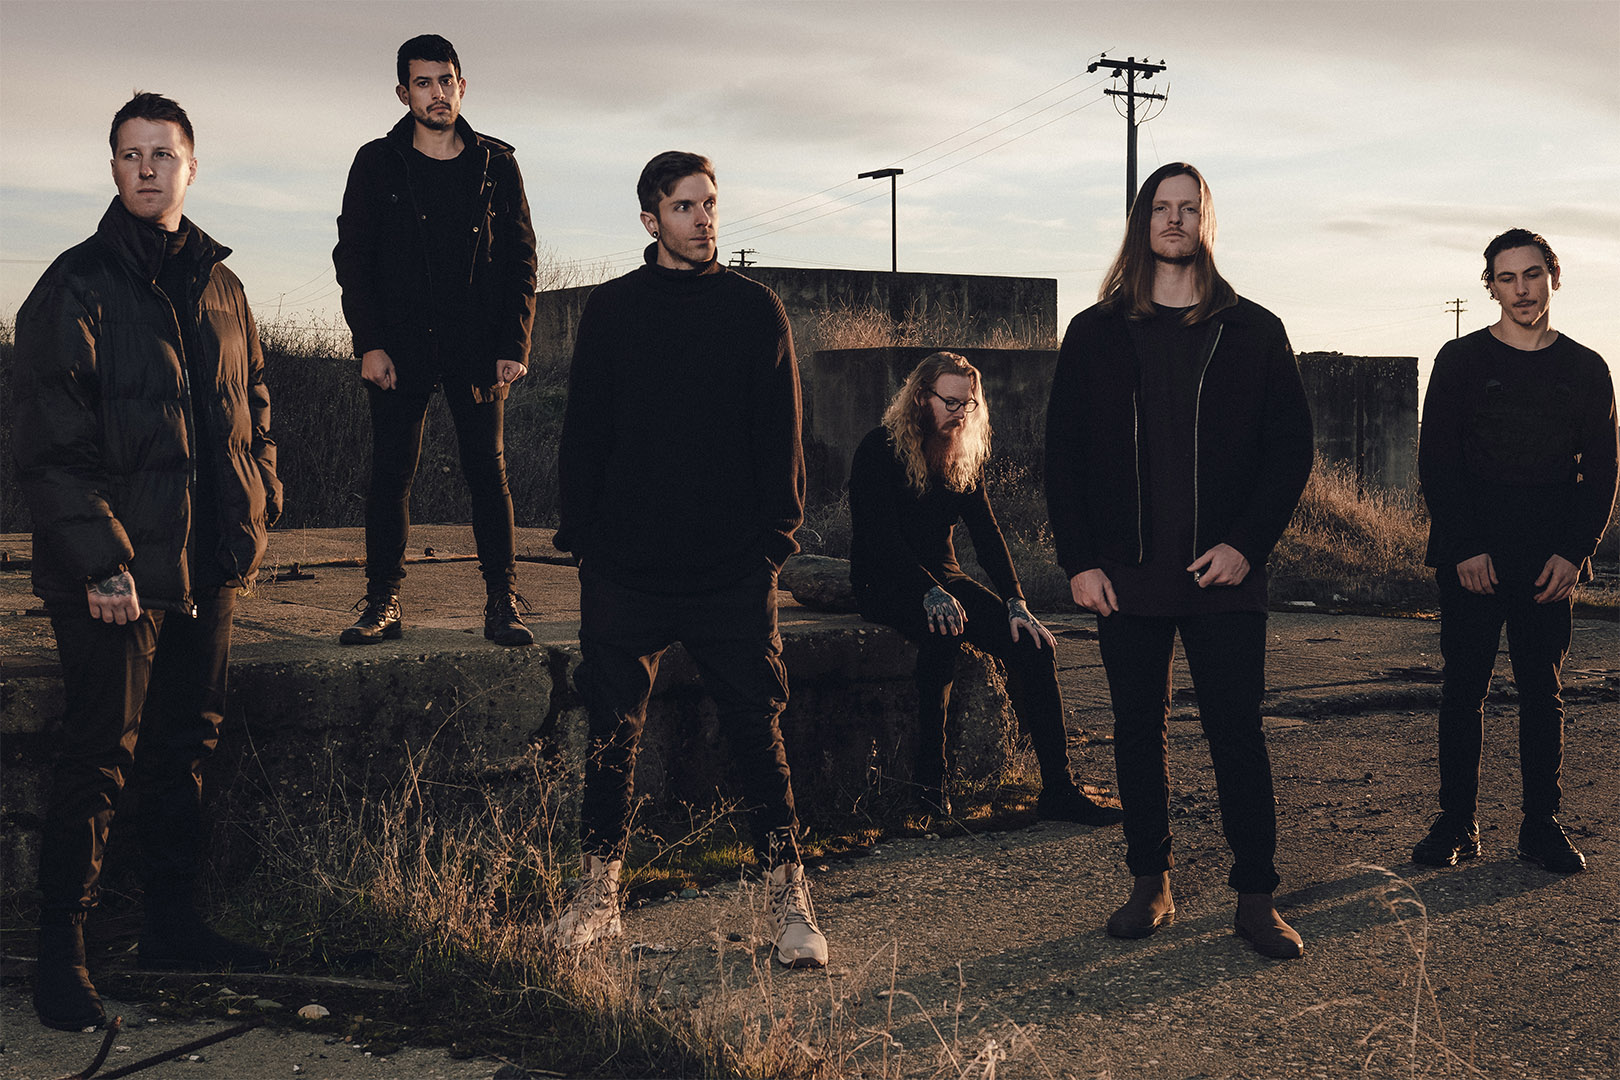 KINGDOM OF GIANTS RELEASE NEW SINGLE “BLUE DREAM” FEATURING MICHAEL BARR